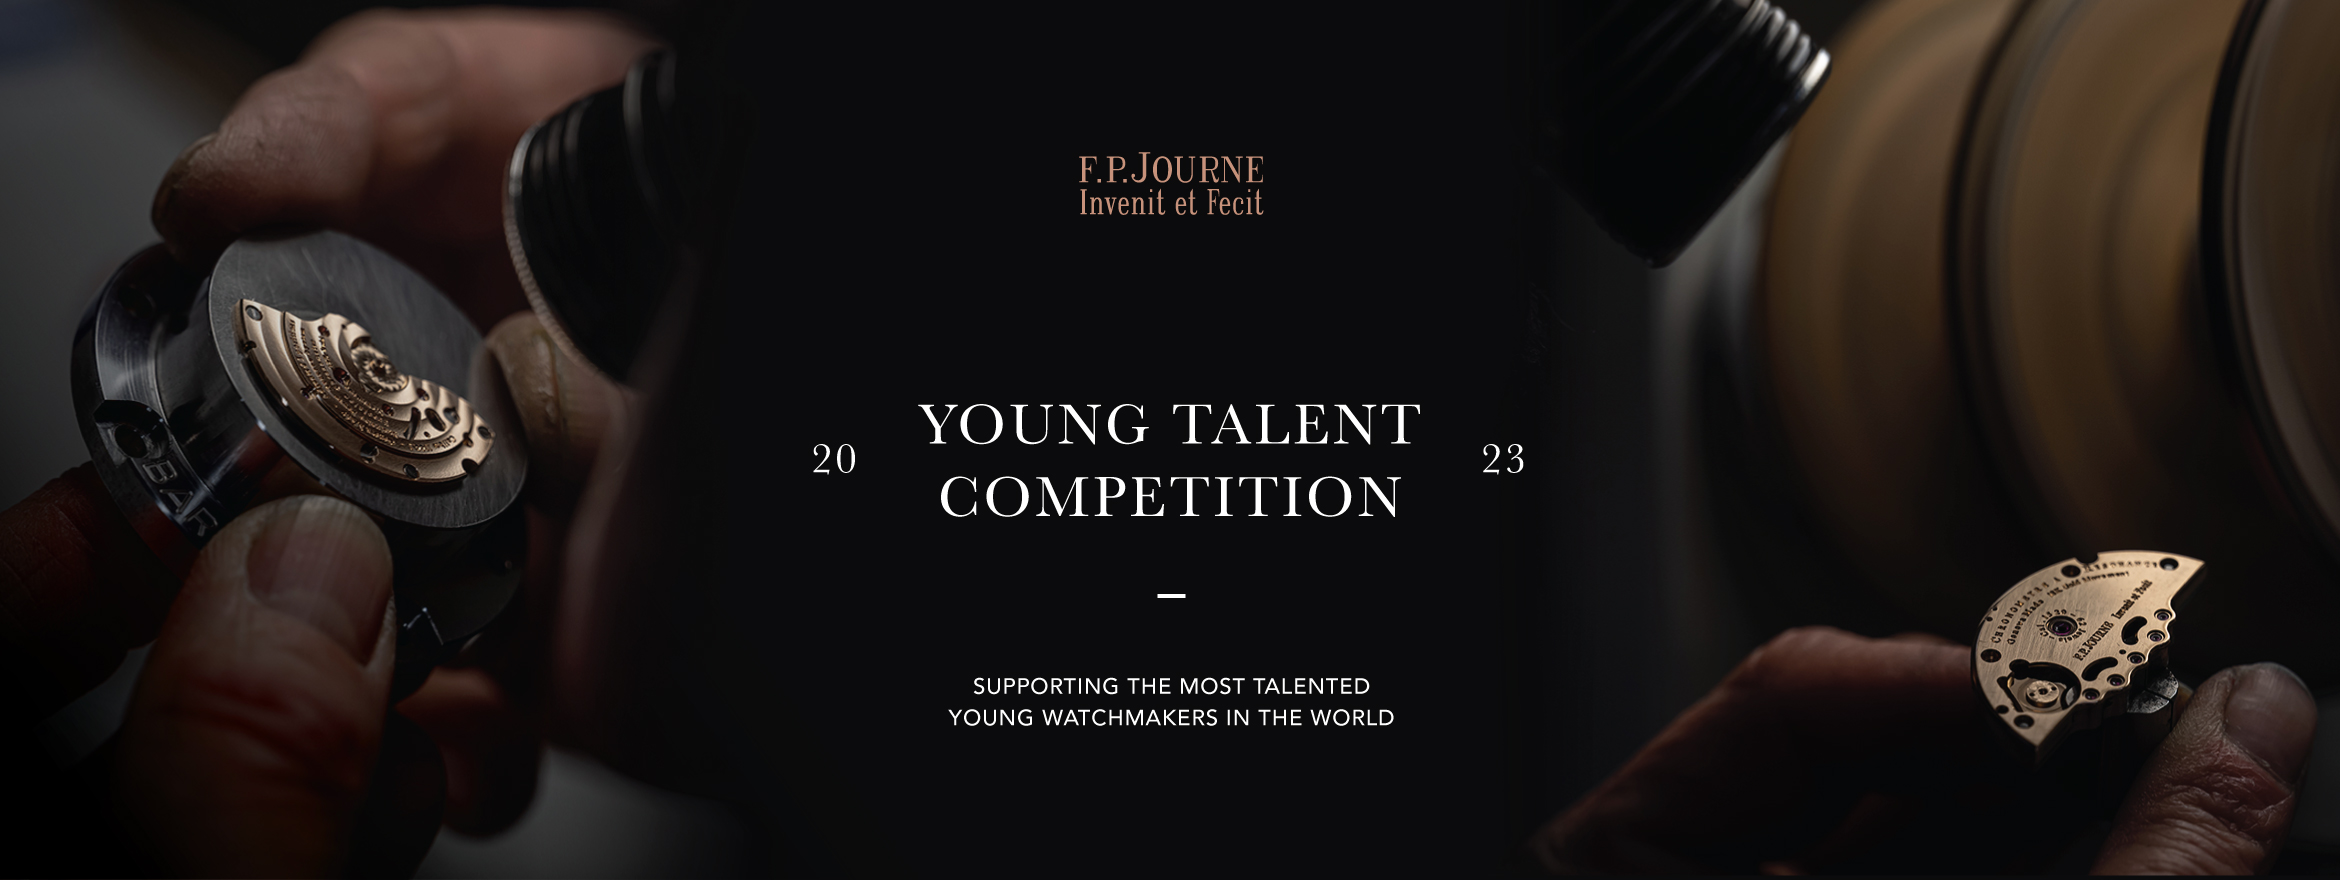 Call for Submissions: F.P.Journe Young Talent Competition 2023